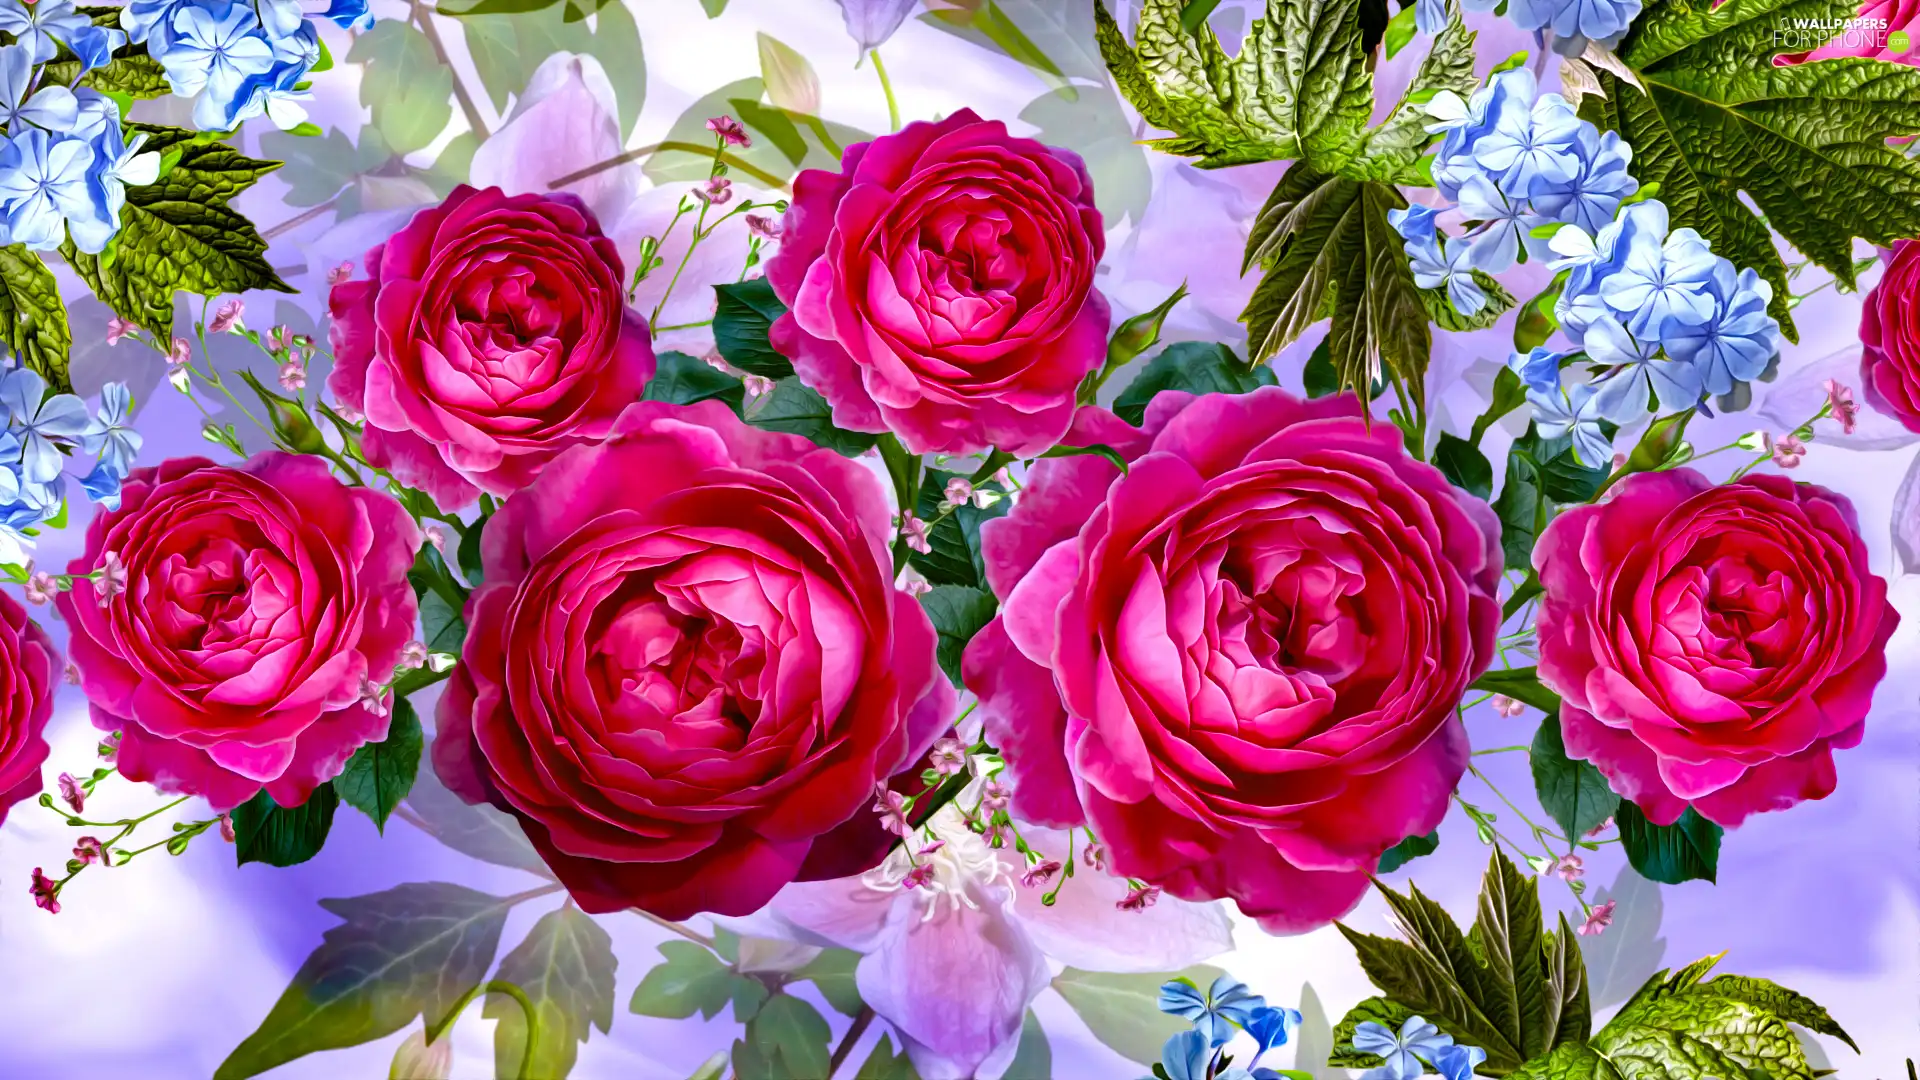 roses, graphics, developed, Pink, Flowers